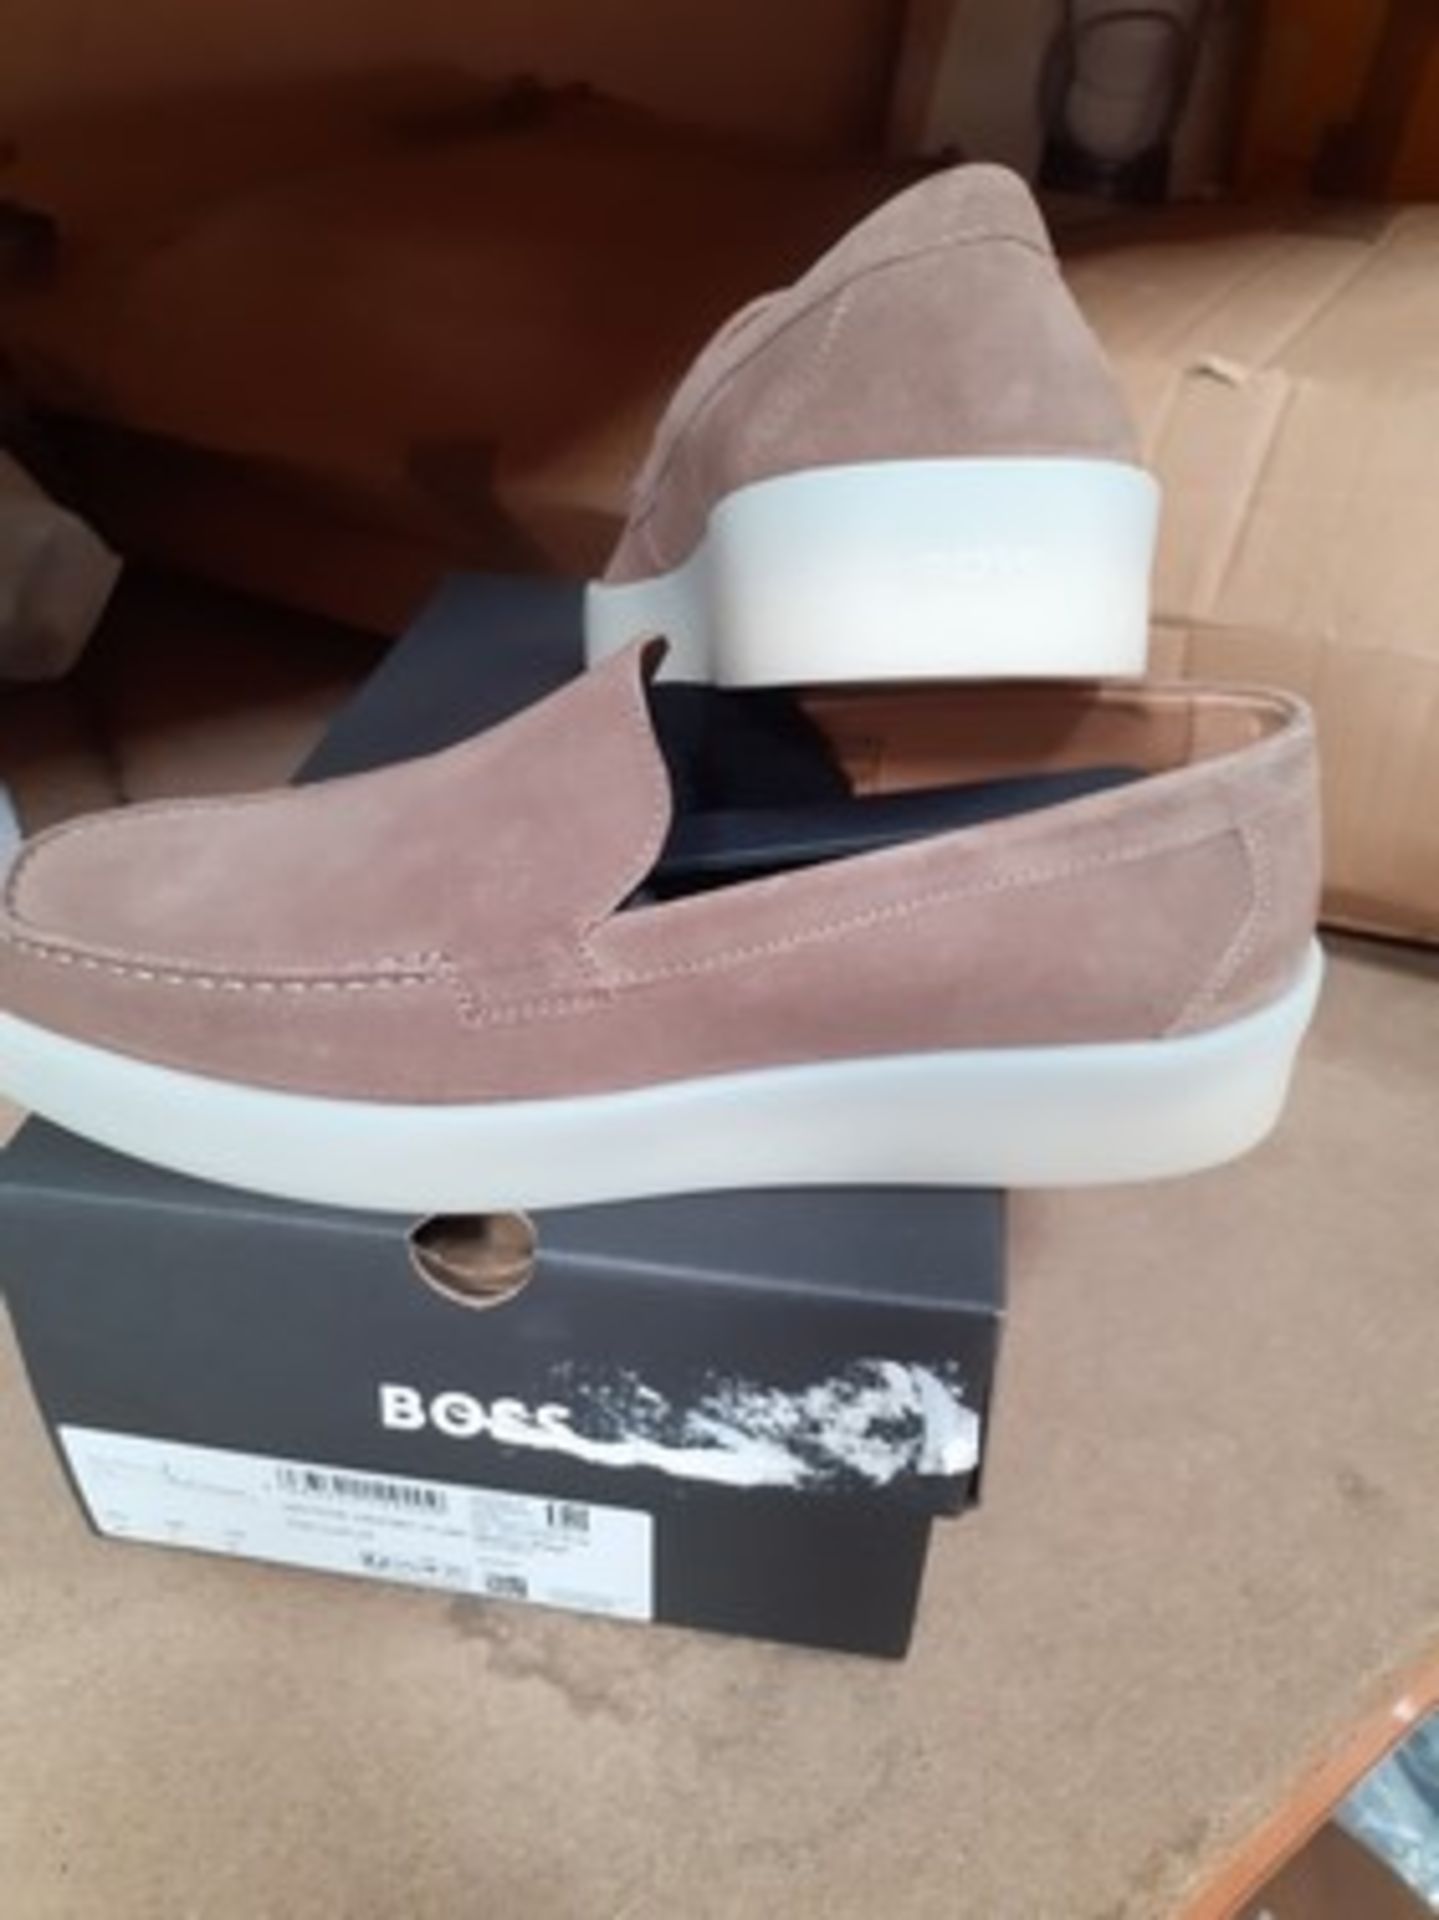 1 x pair of Hugo Boss, Clay loafers in beige, size UK7 - new in box (E8B)